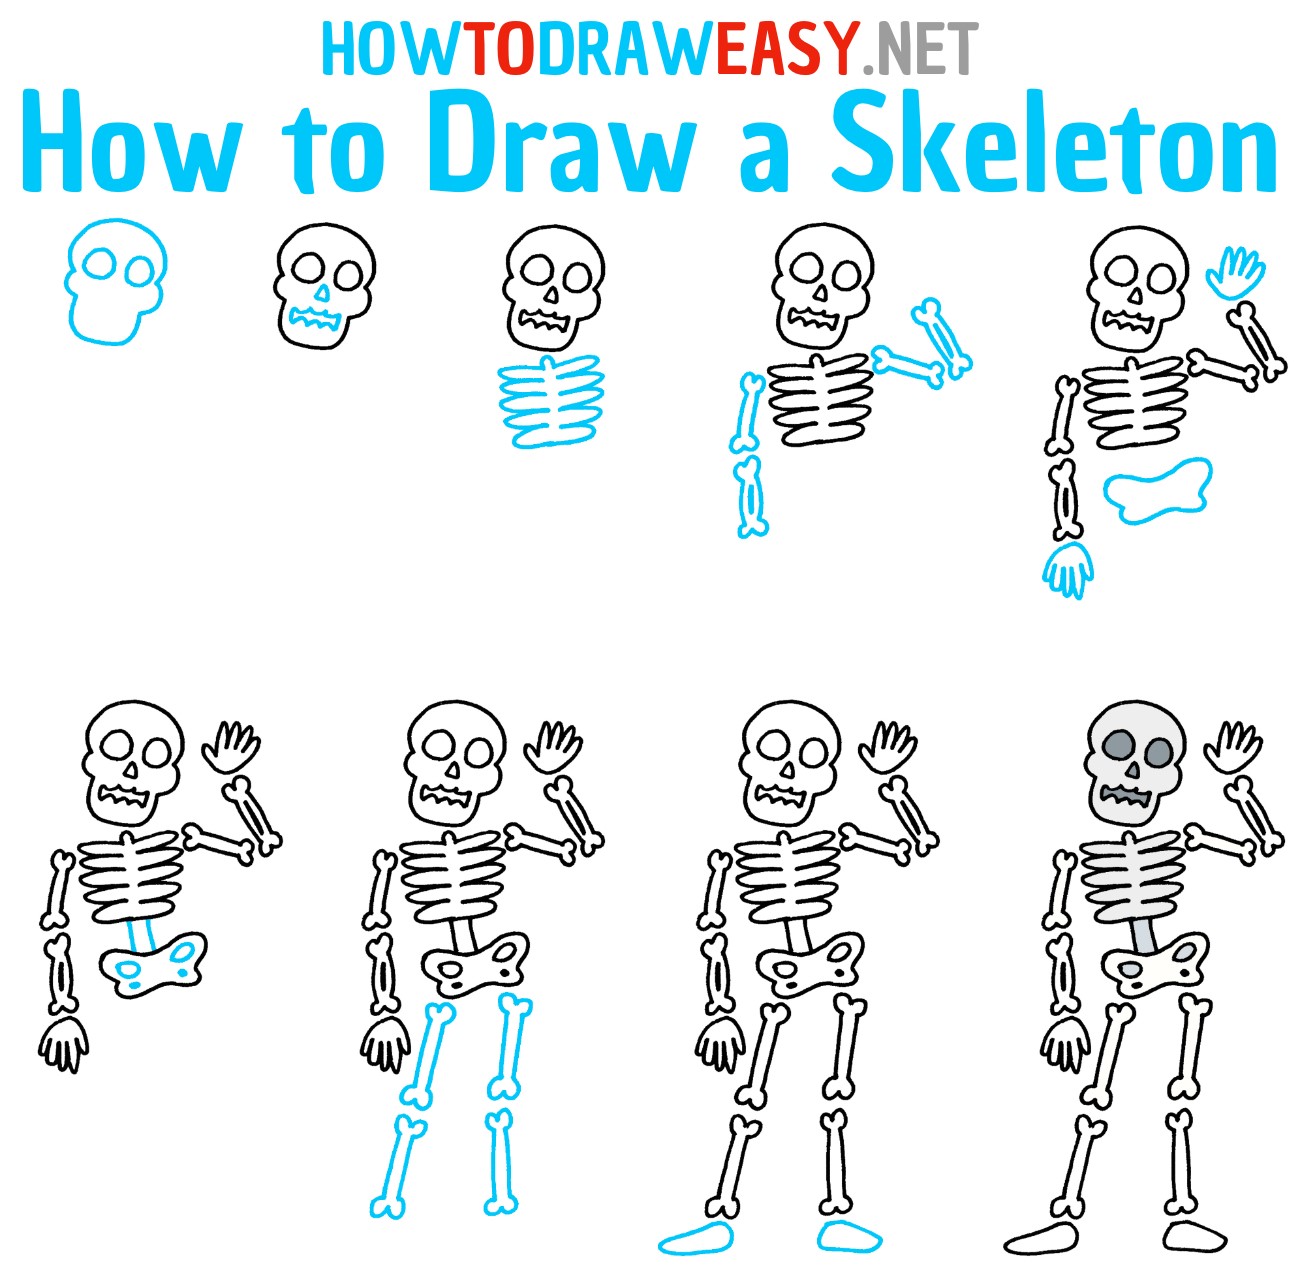 How To Draw A Skeleton And Ghost, Step by Step, Drawing Guide, by Dawn -  DragoArt